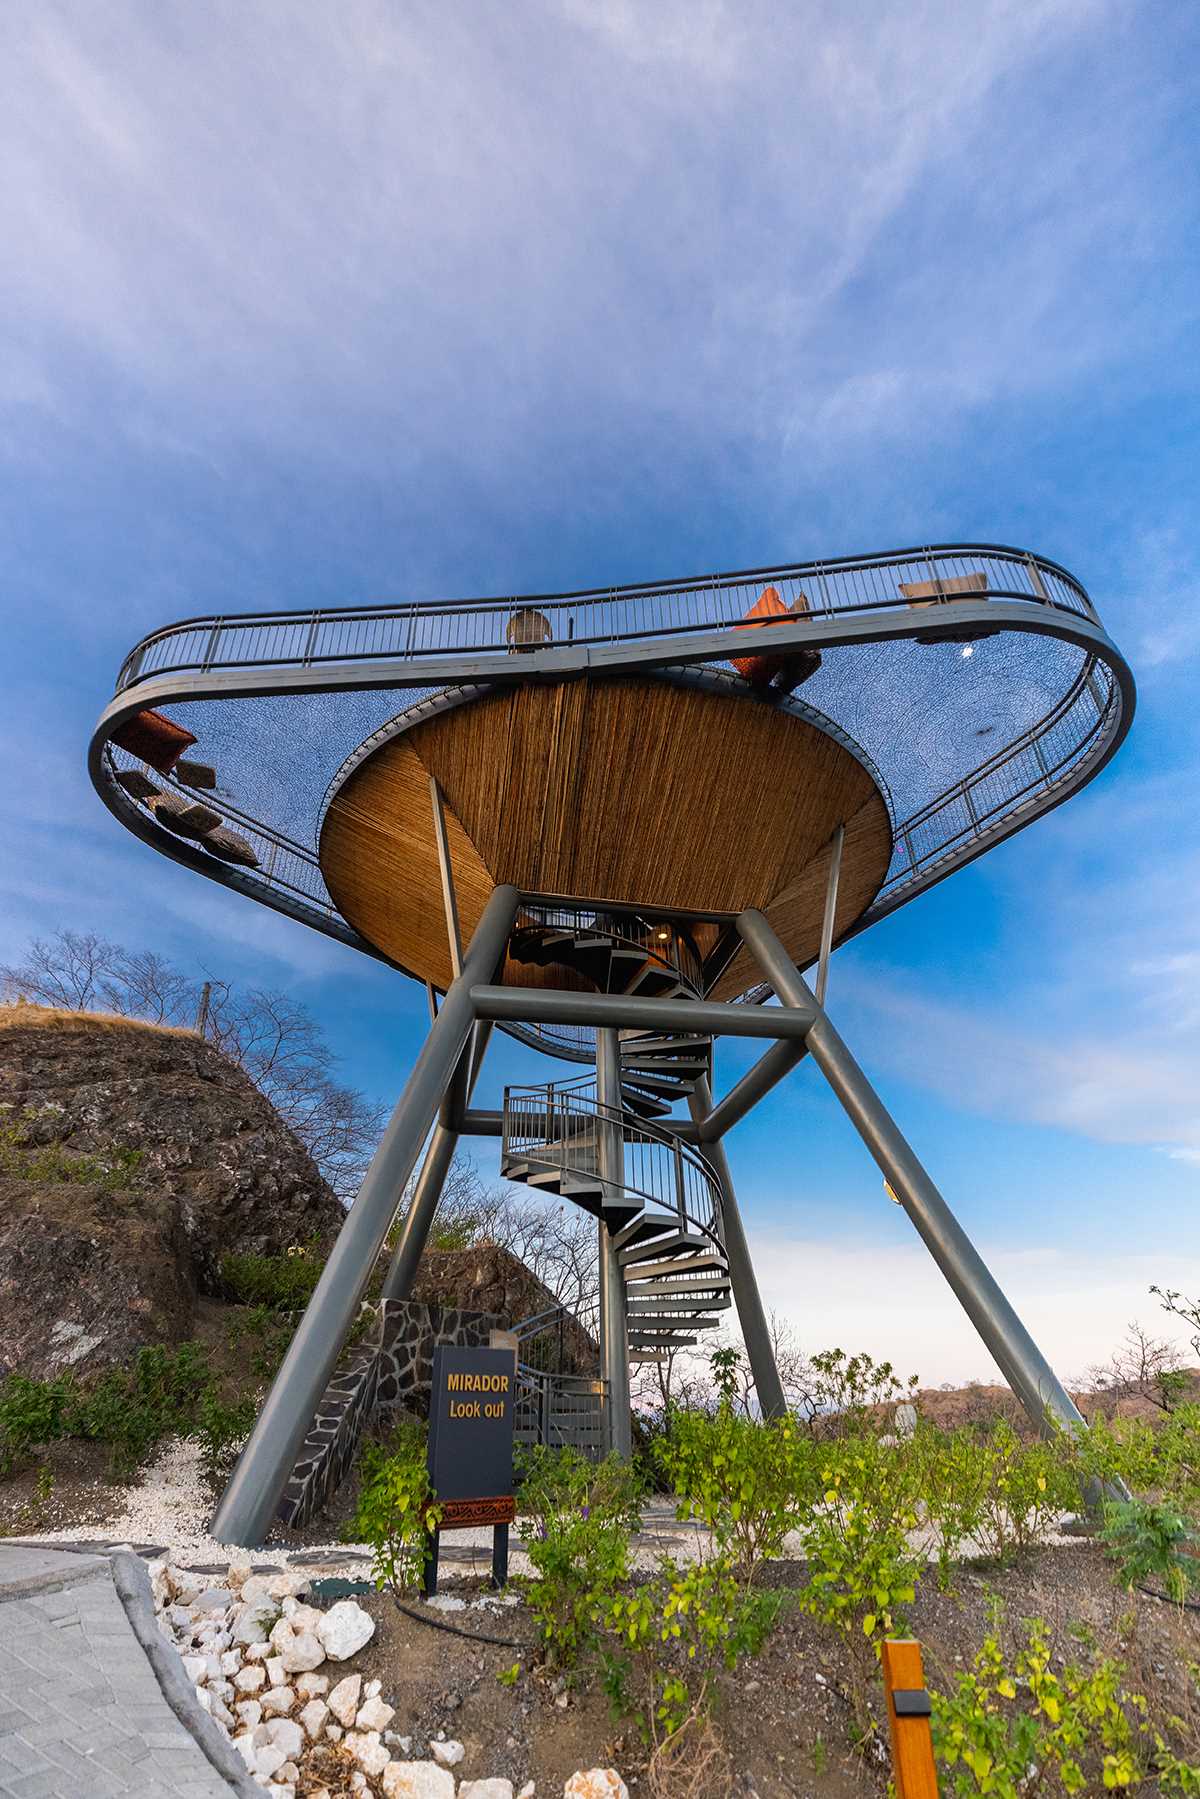 The Mirador Lookout in Costa Rica has spiral stairs that lead up to a platform that's surrounded by netting, creating a place to relax and enjoy the view.